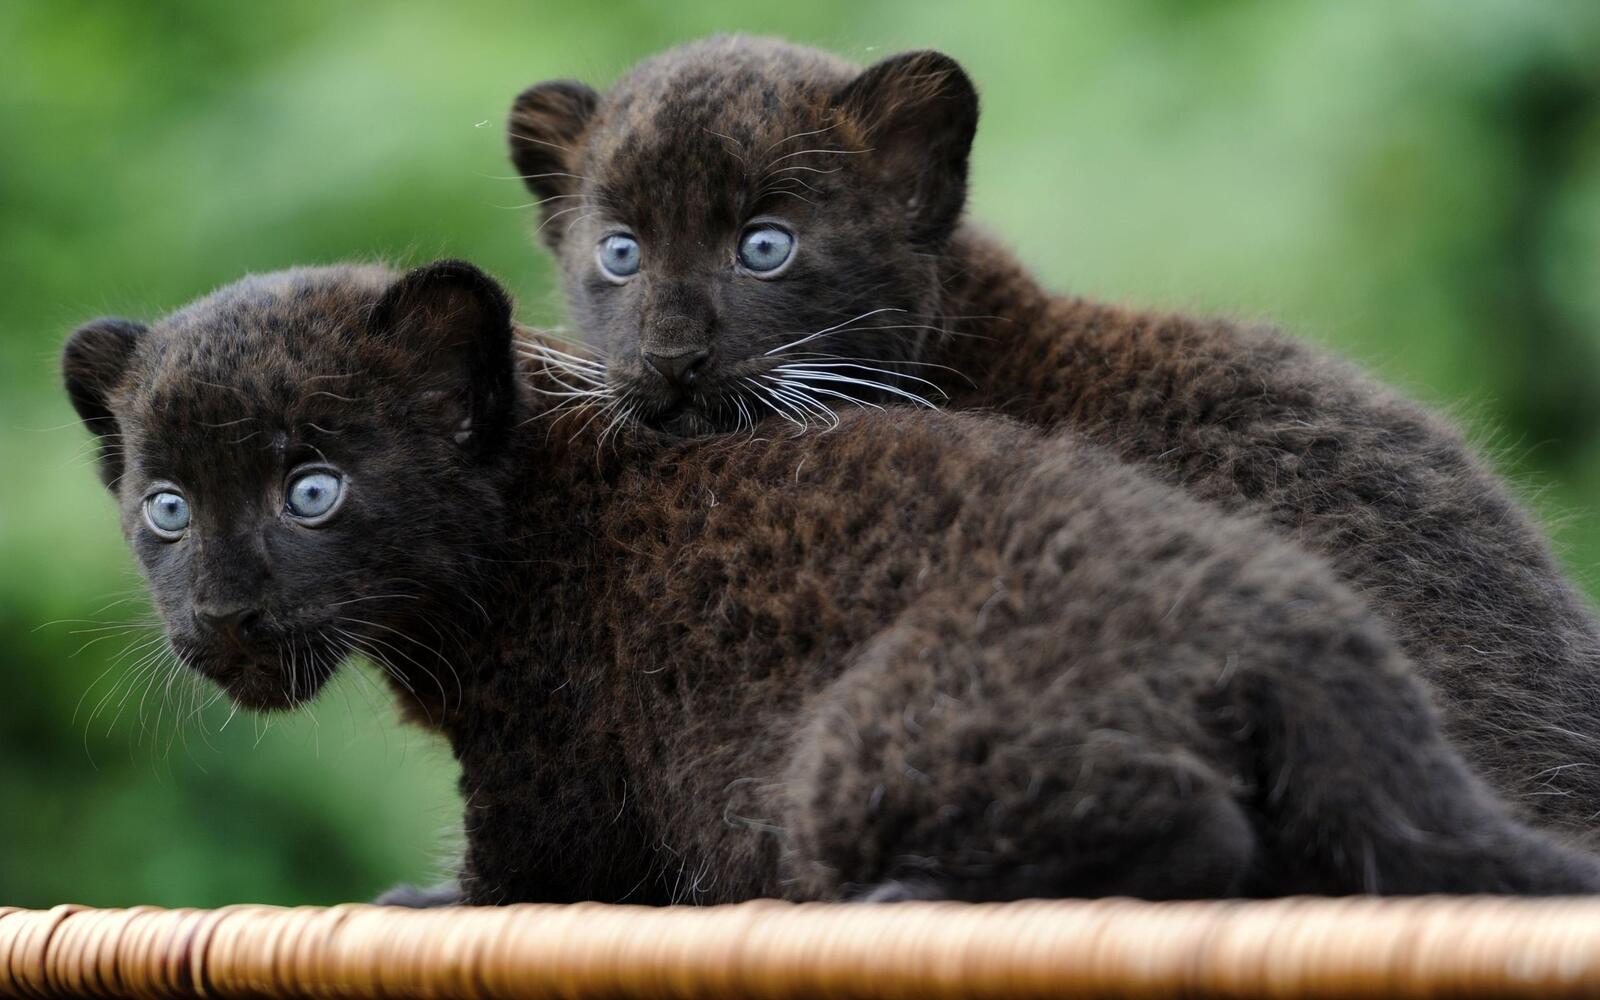 Wallpapers cub cute wallpaper black panthers on the desktop